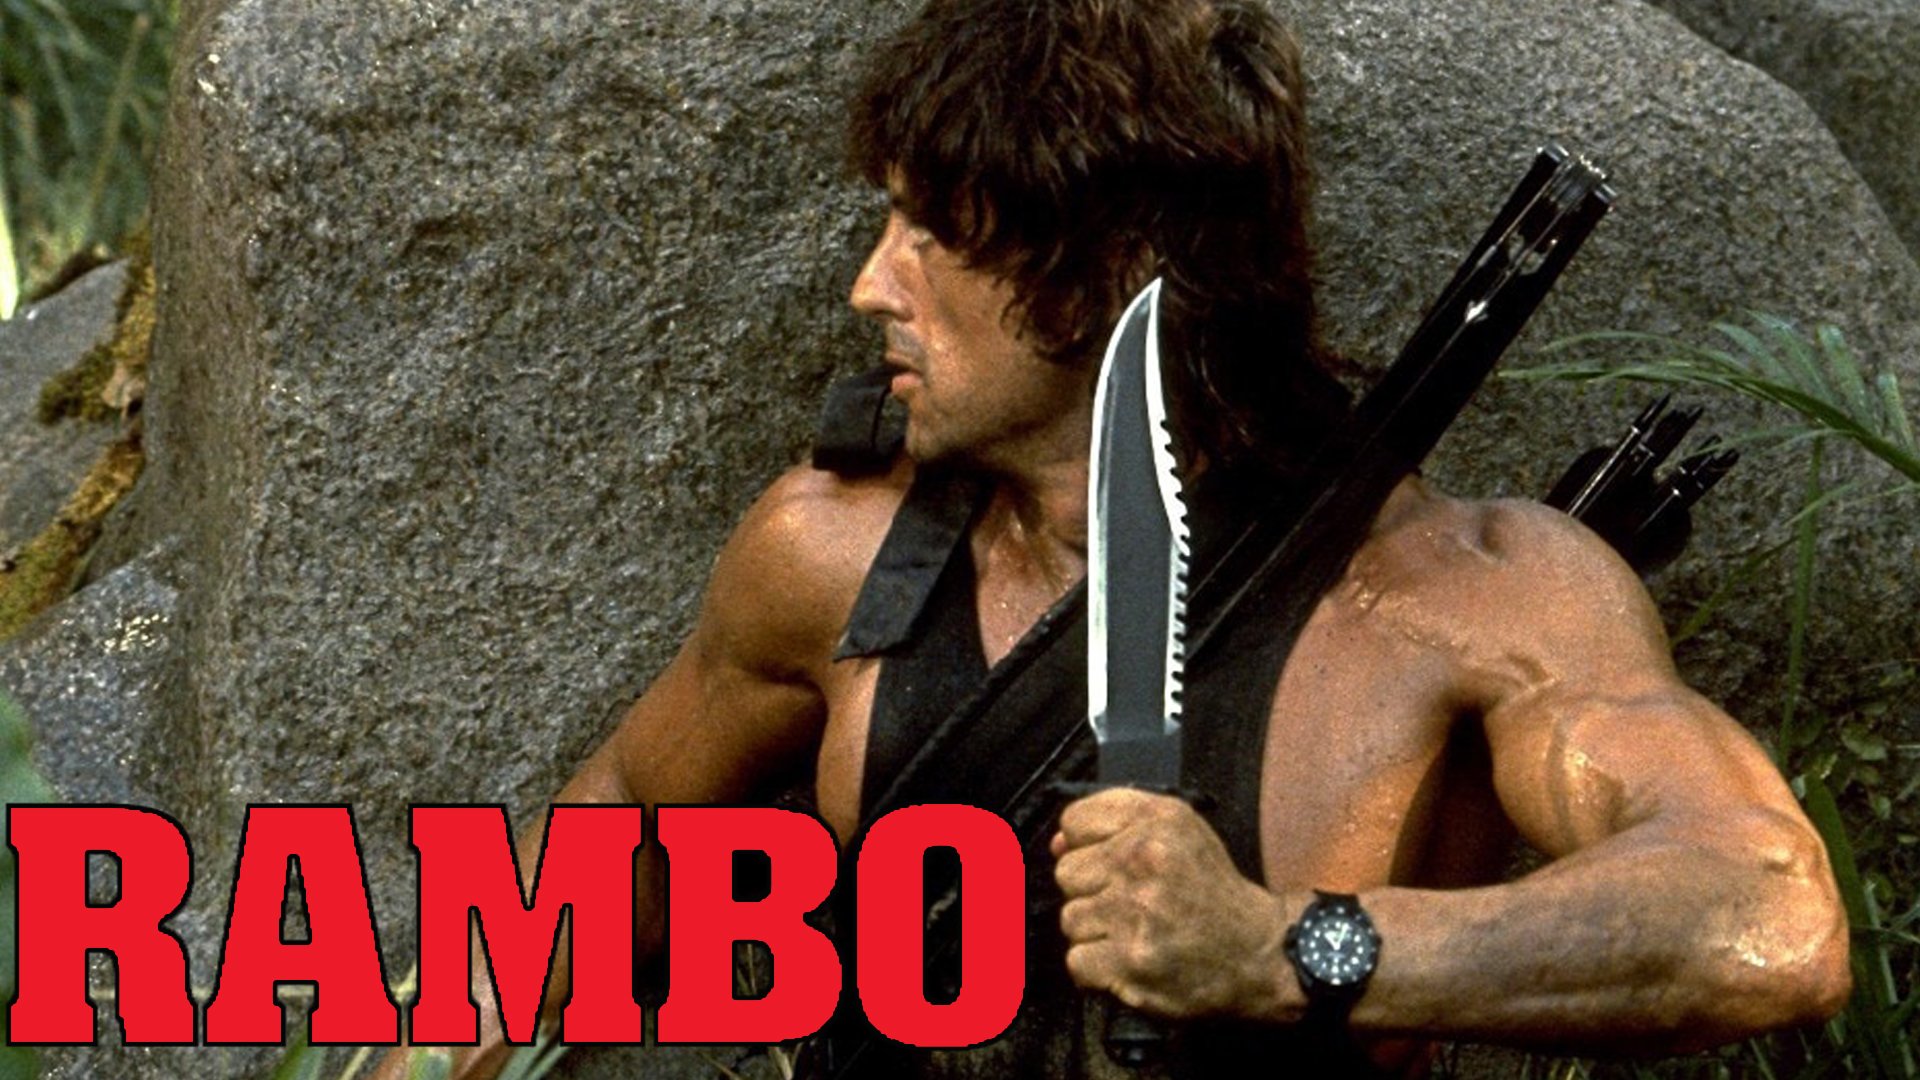 Rambo's knife is as famous as he is, but it's gone through some major changes over the years. Composite by Coffee or Die Magazine.